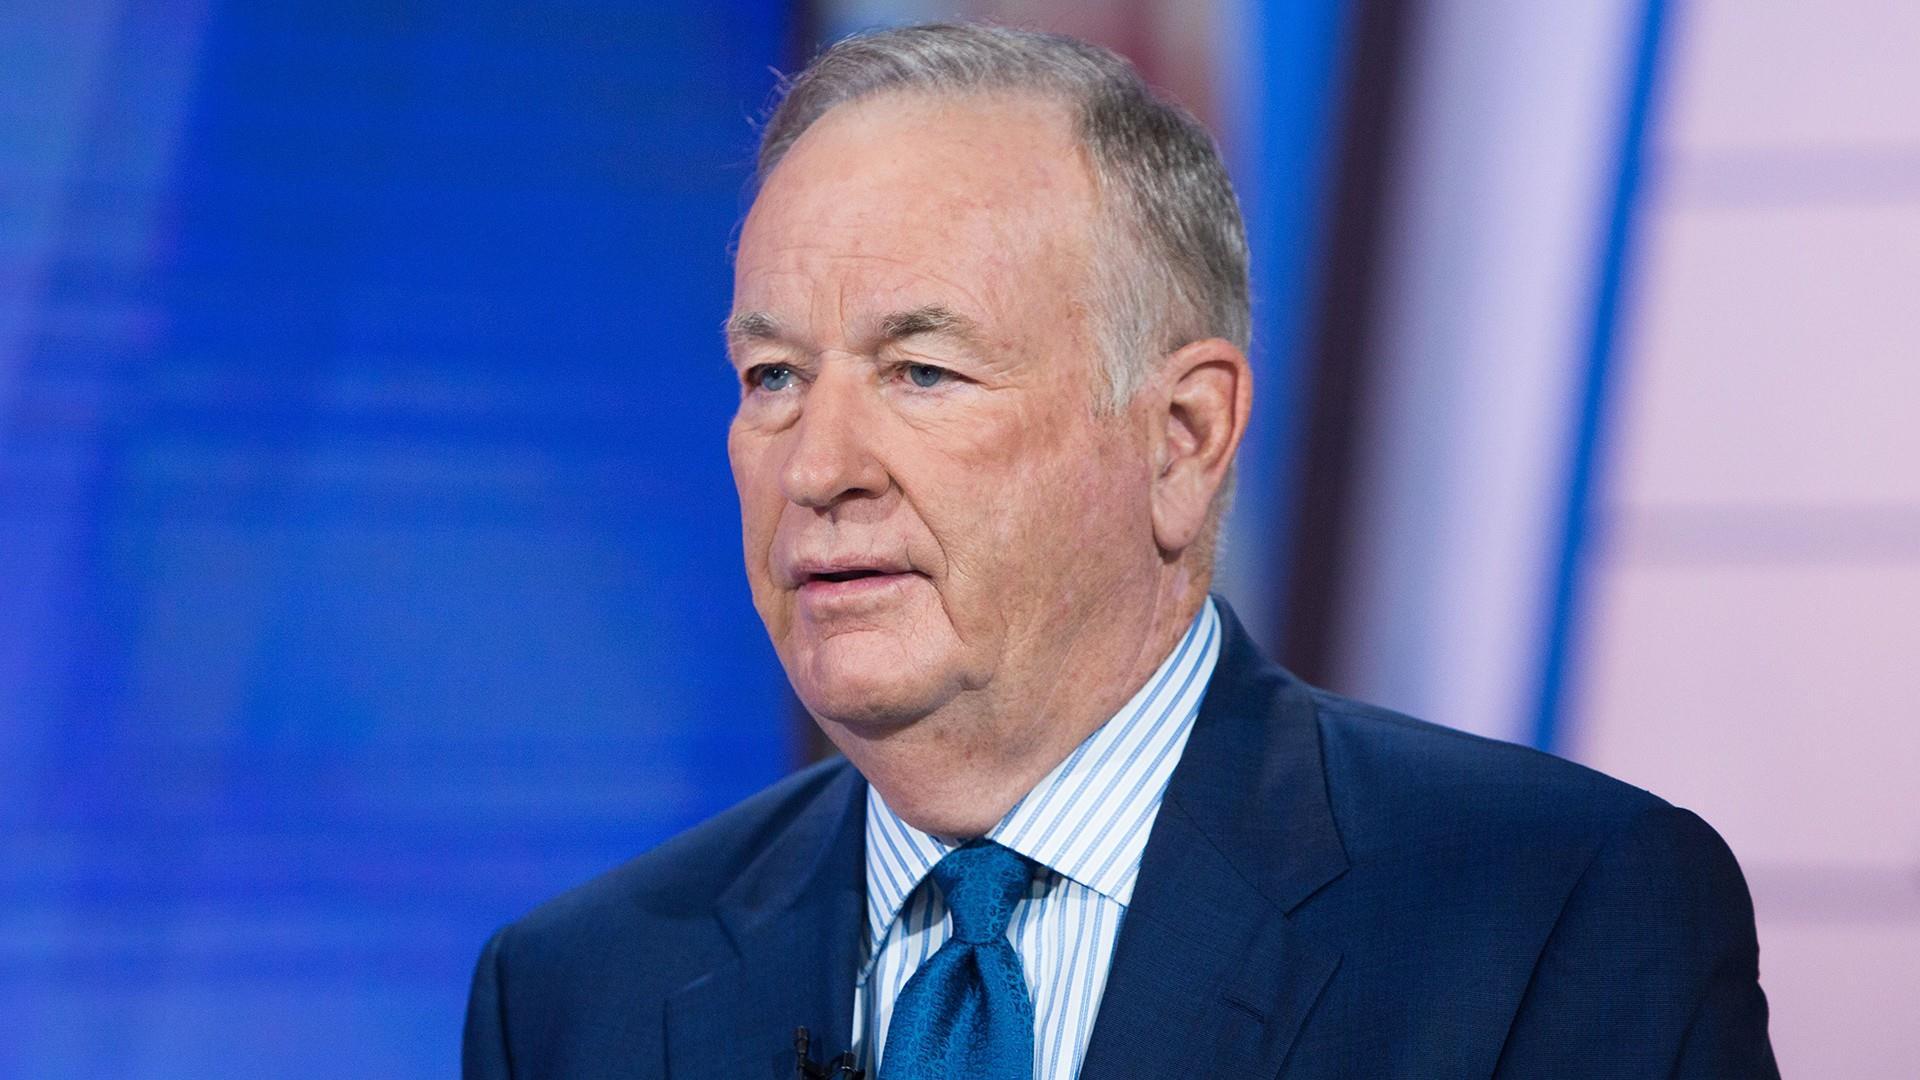 Bill O'Reilly May Wind Up at Sinclair Broadcasting